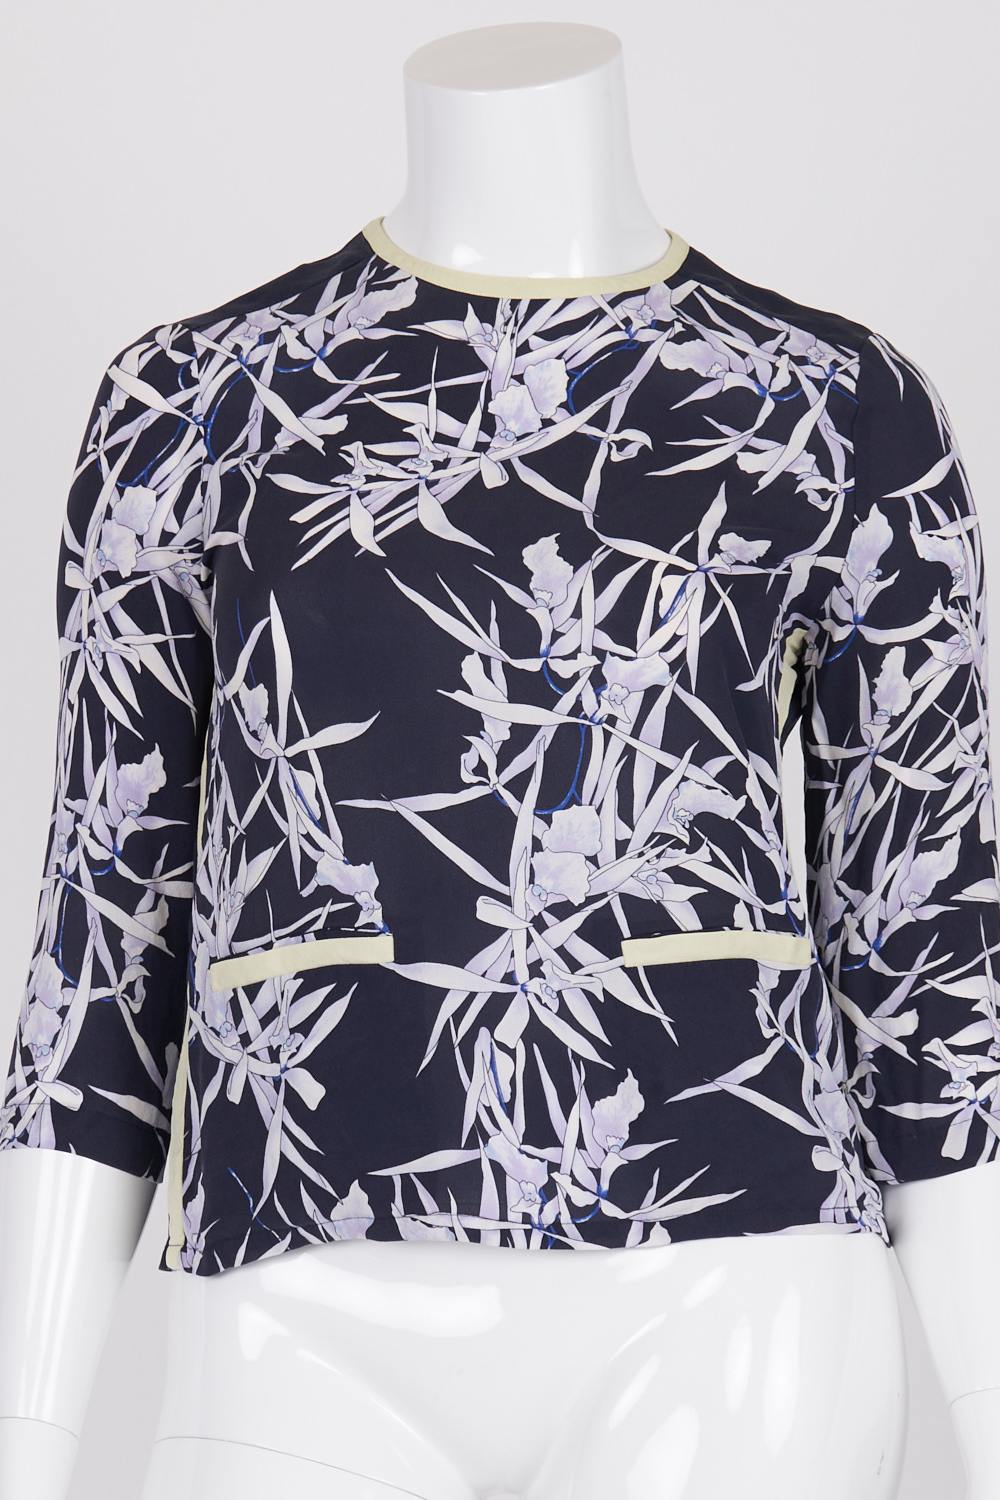 WHISTLES Navy Floral 100% Silk Top 14